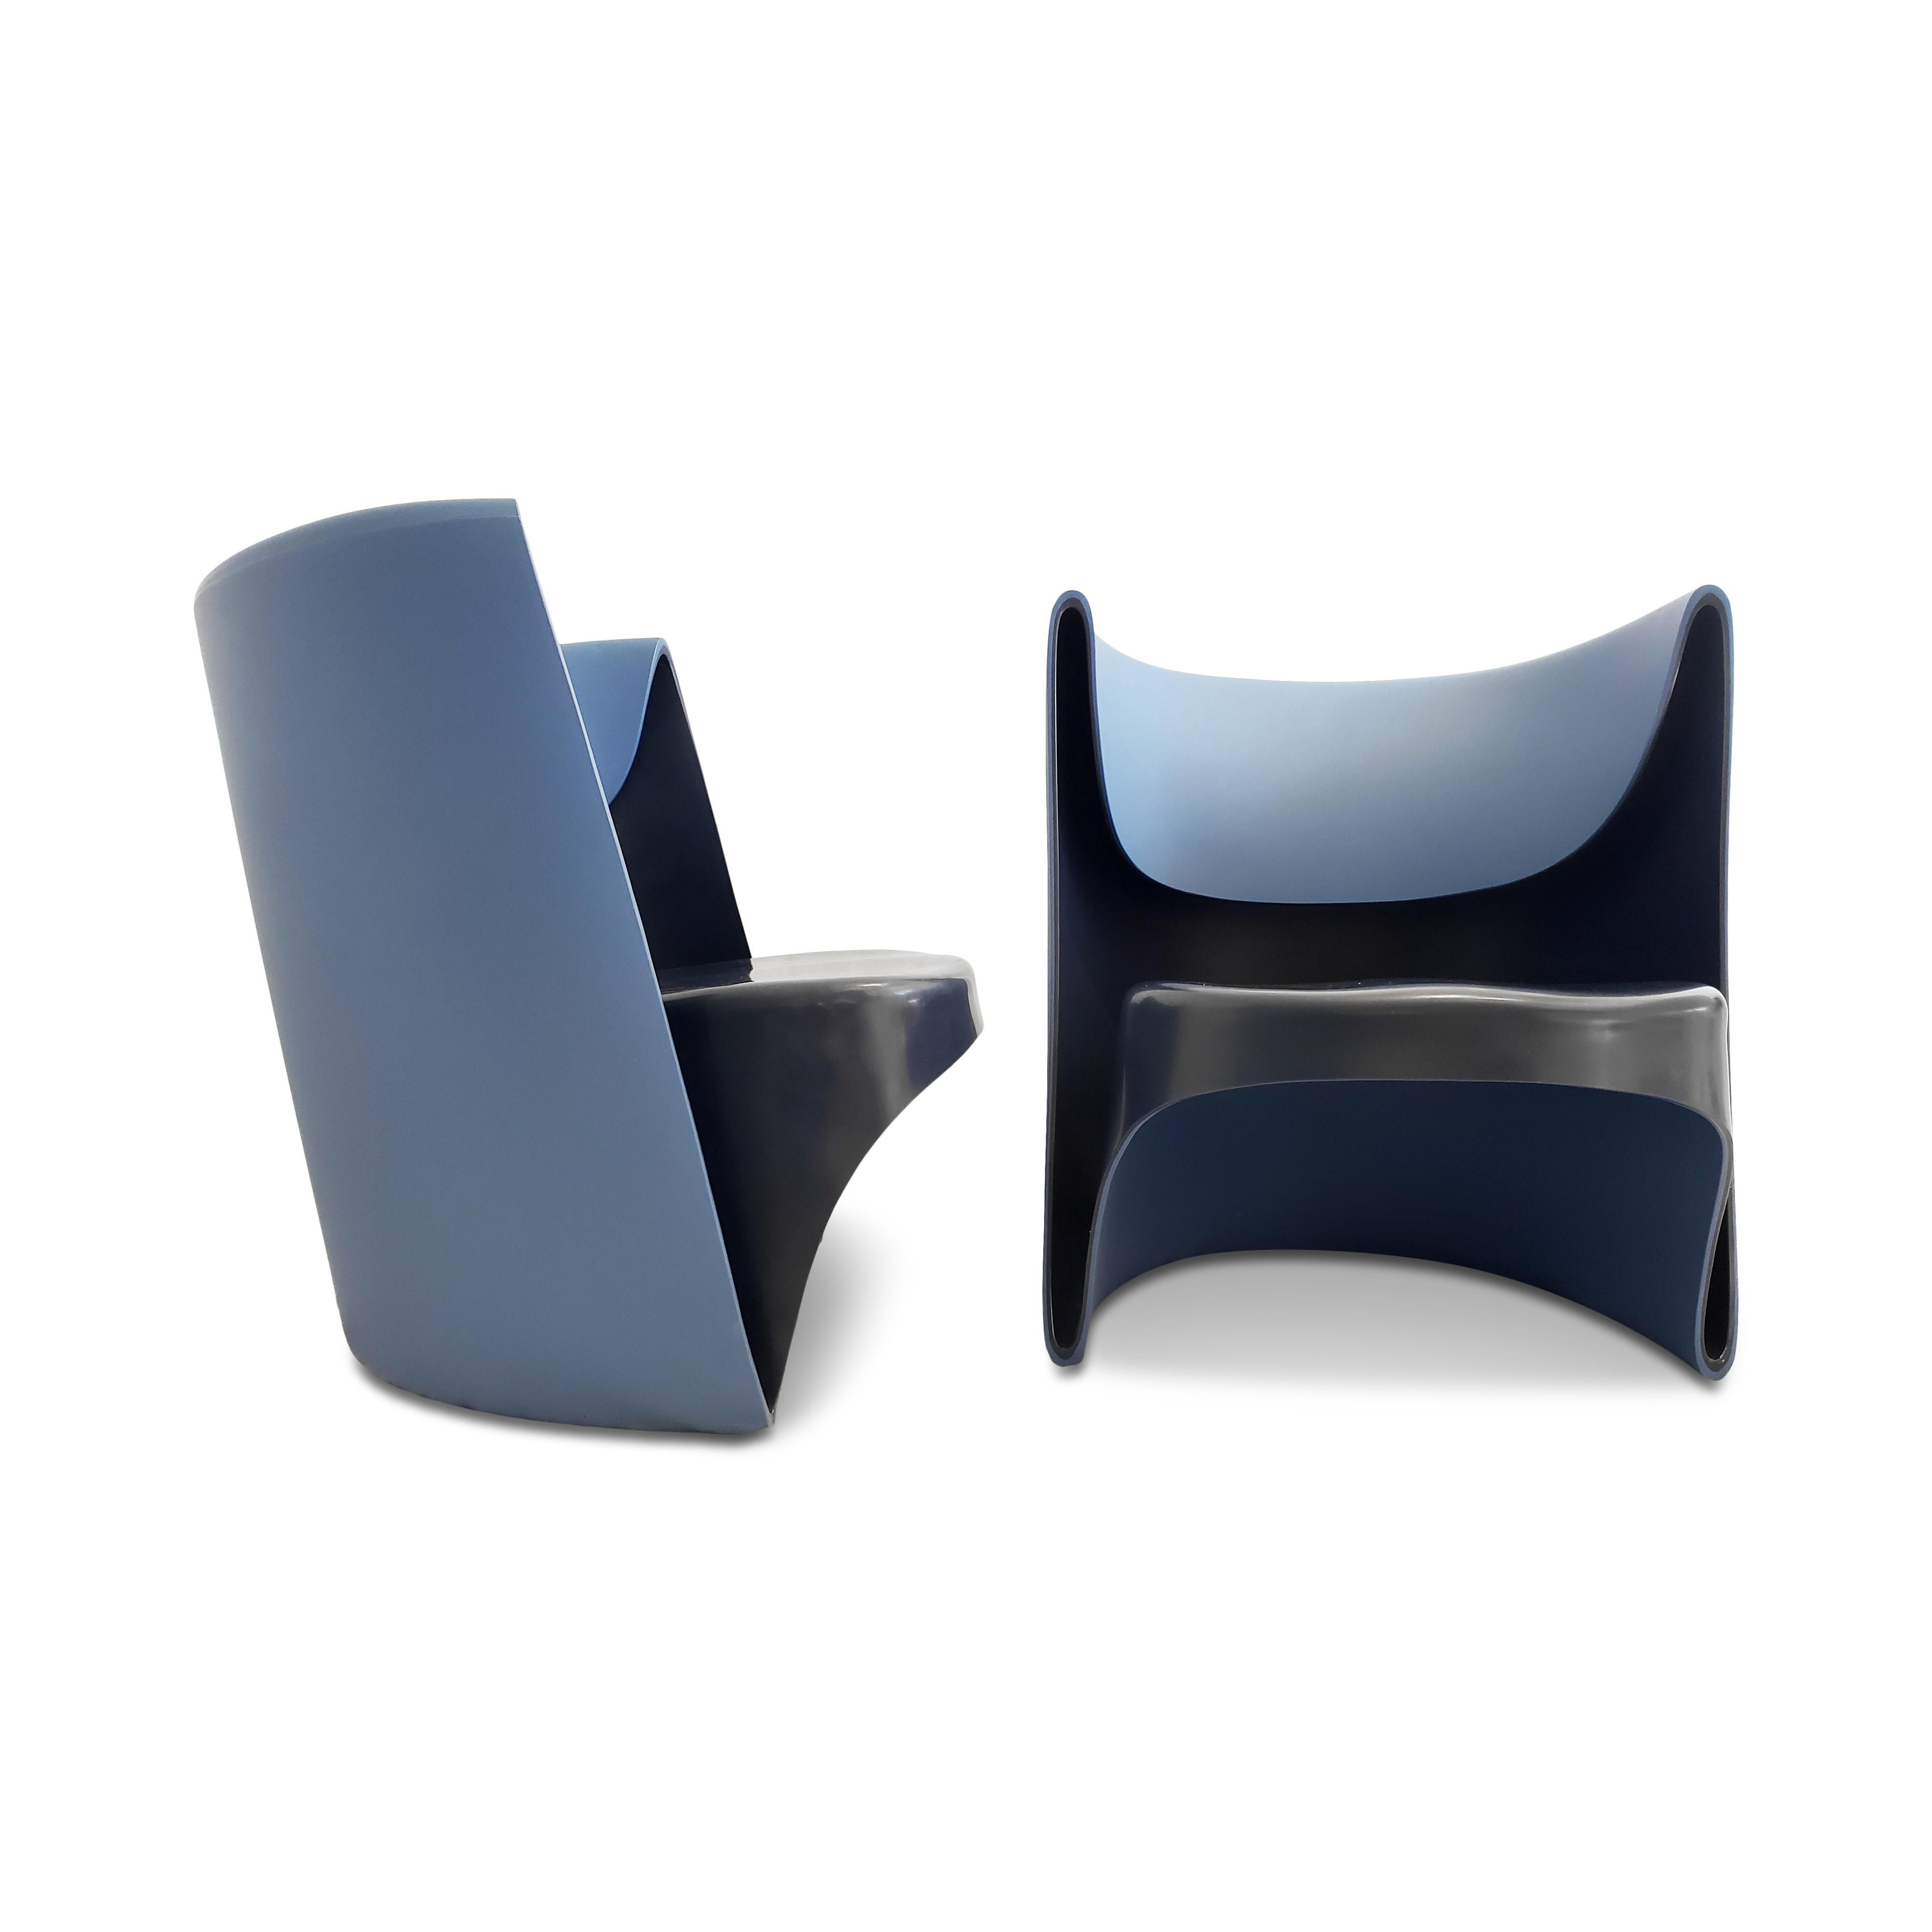 A pair of rare Nino Rota chairs in blue designed by Ron Arad for Cappellini in 2002. Reflecting Arad's exploration of forms and production processes, these twin-wall polyethylene chairs were constructed through a rotation moulding production. A